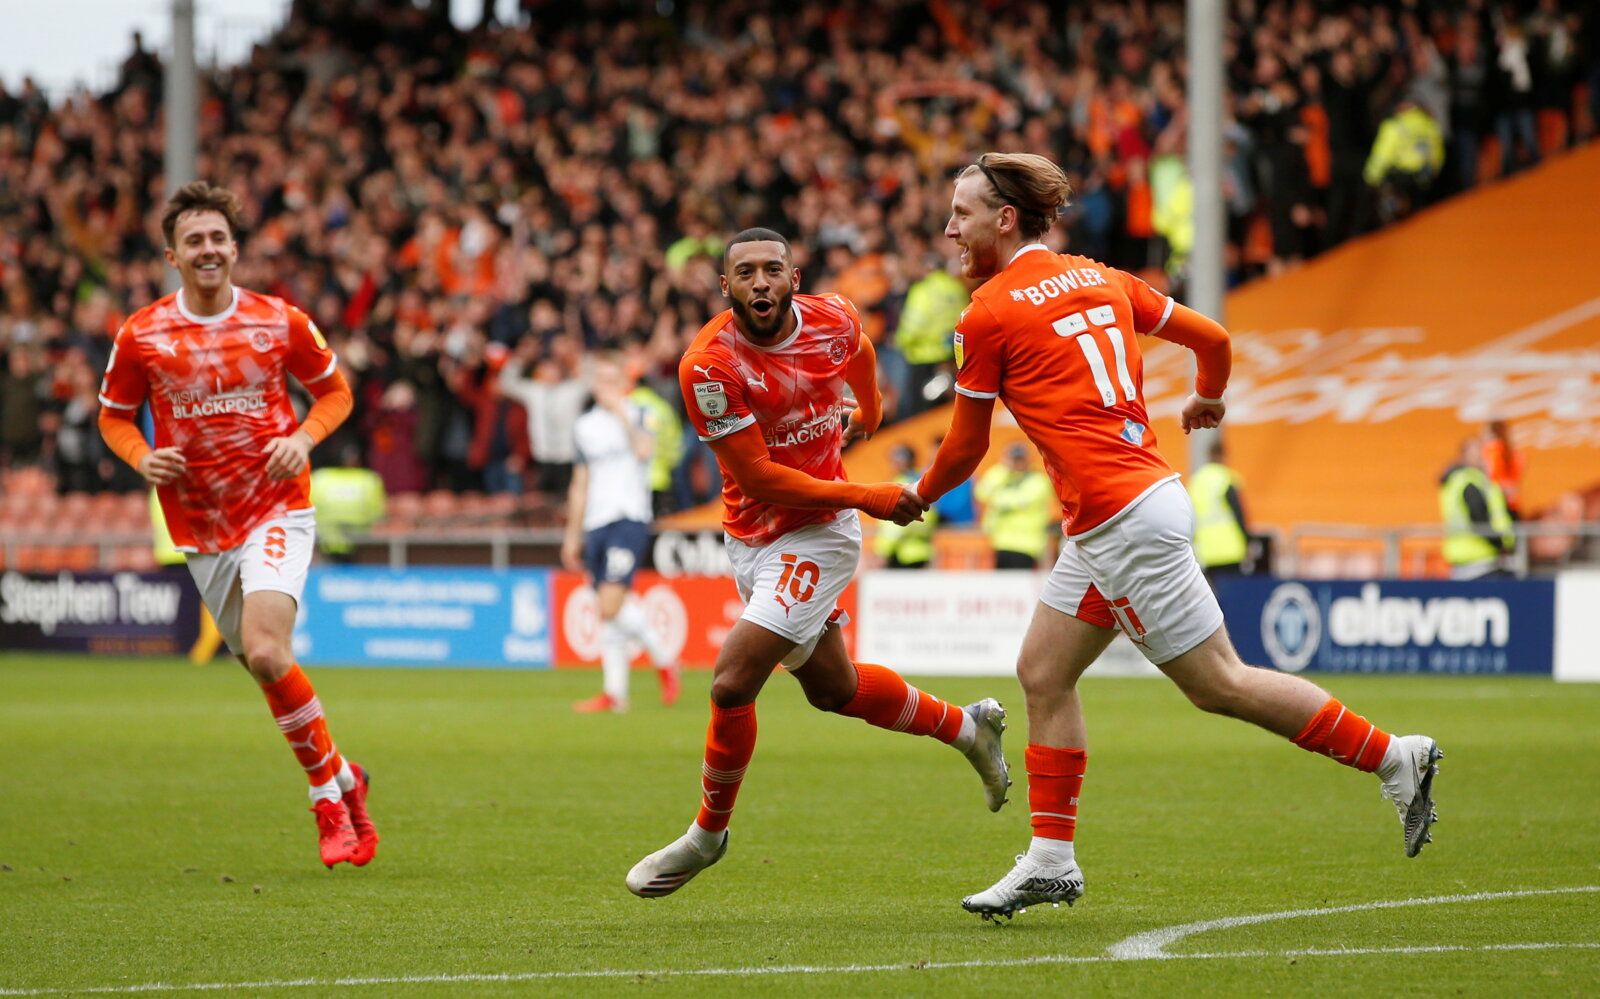 Soccer Football - Championship - Blackpool v Preston North End - Bloomfield Road, Blackpool, Britain - October 23, 2021 Blackpool's Keshi Anderson celebrates scoring his side's first goal Action Images/Ed Sykes  EDITORIAL USE ONLY. No use with unauthorized audio, video, data, fixture lists, club/league logos or "live" services. Online in-match use limited to 75 images, no video emulation. No use in betting, games or single club/league/player publications.  Please contact your account representat